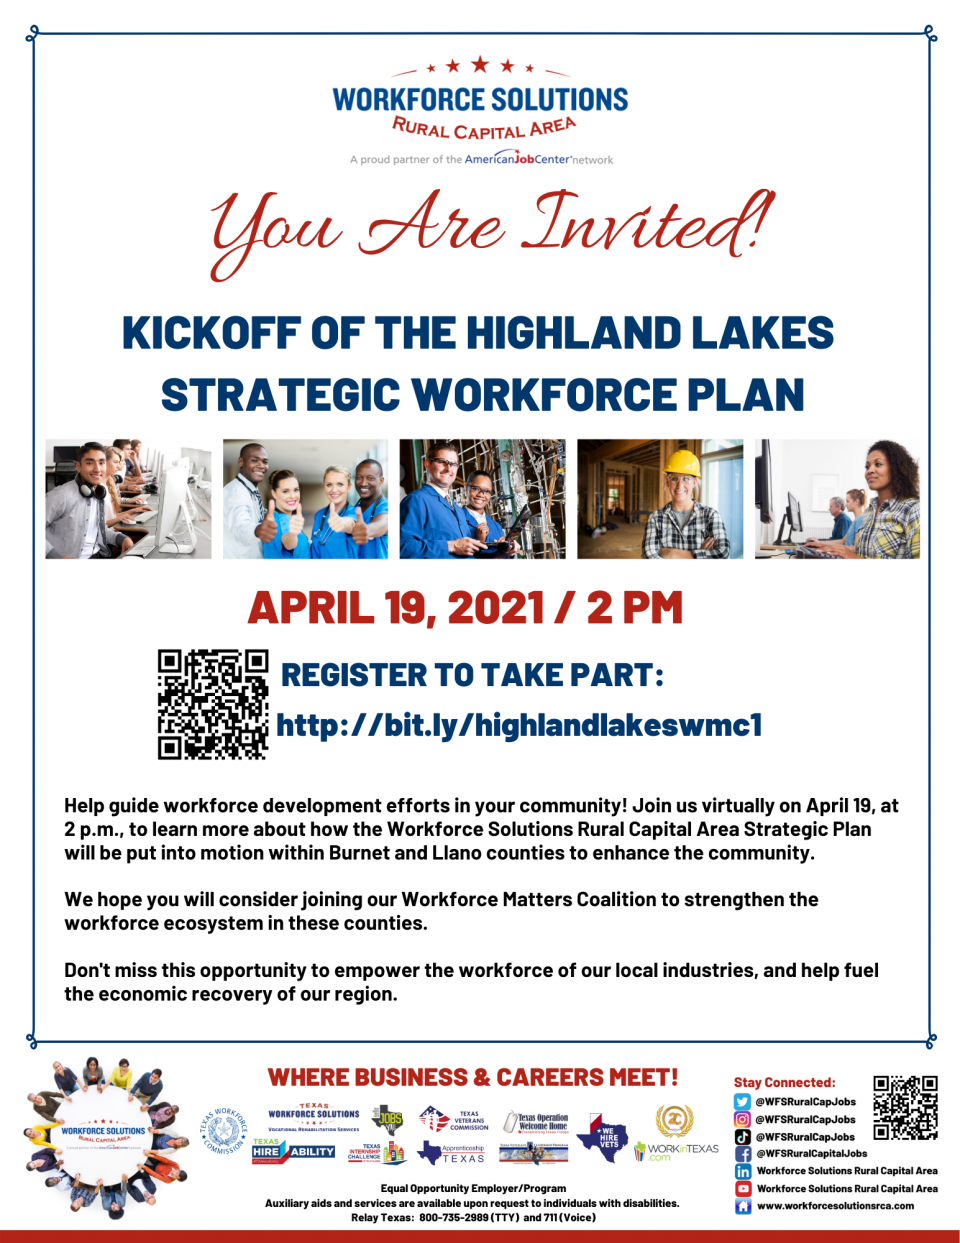 Celebrate the Kickoff of the Highland Lakes Strategic Workforce Plan